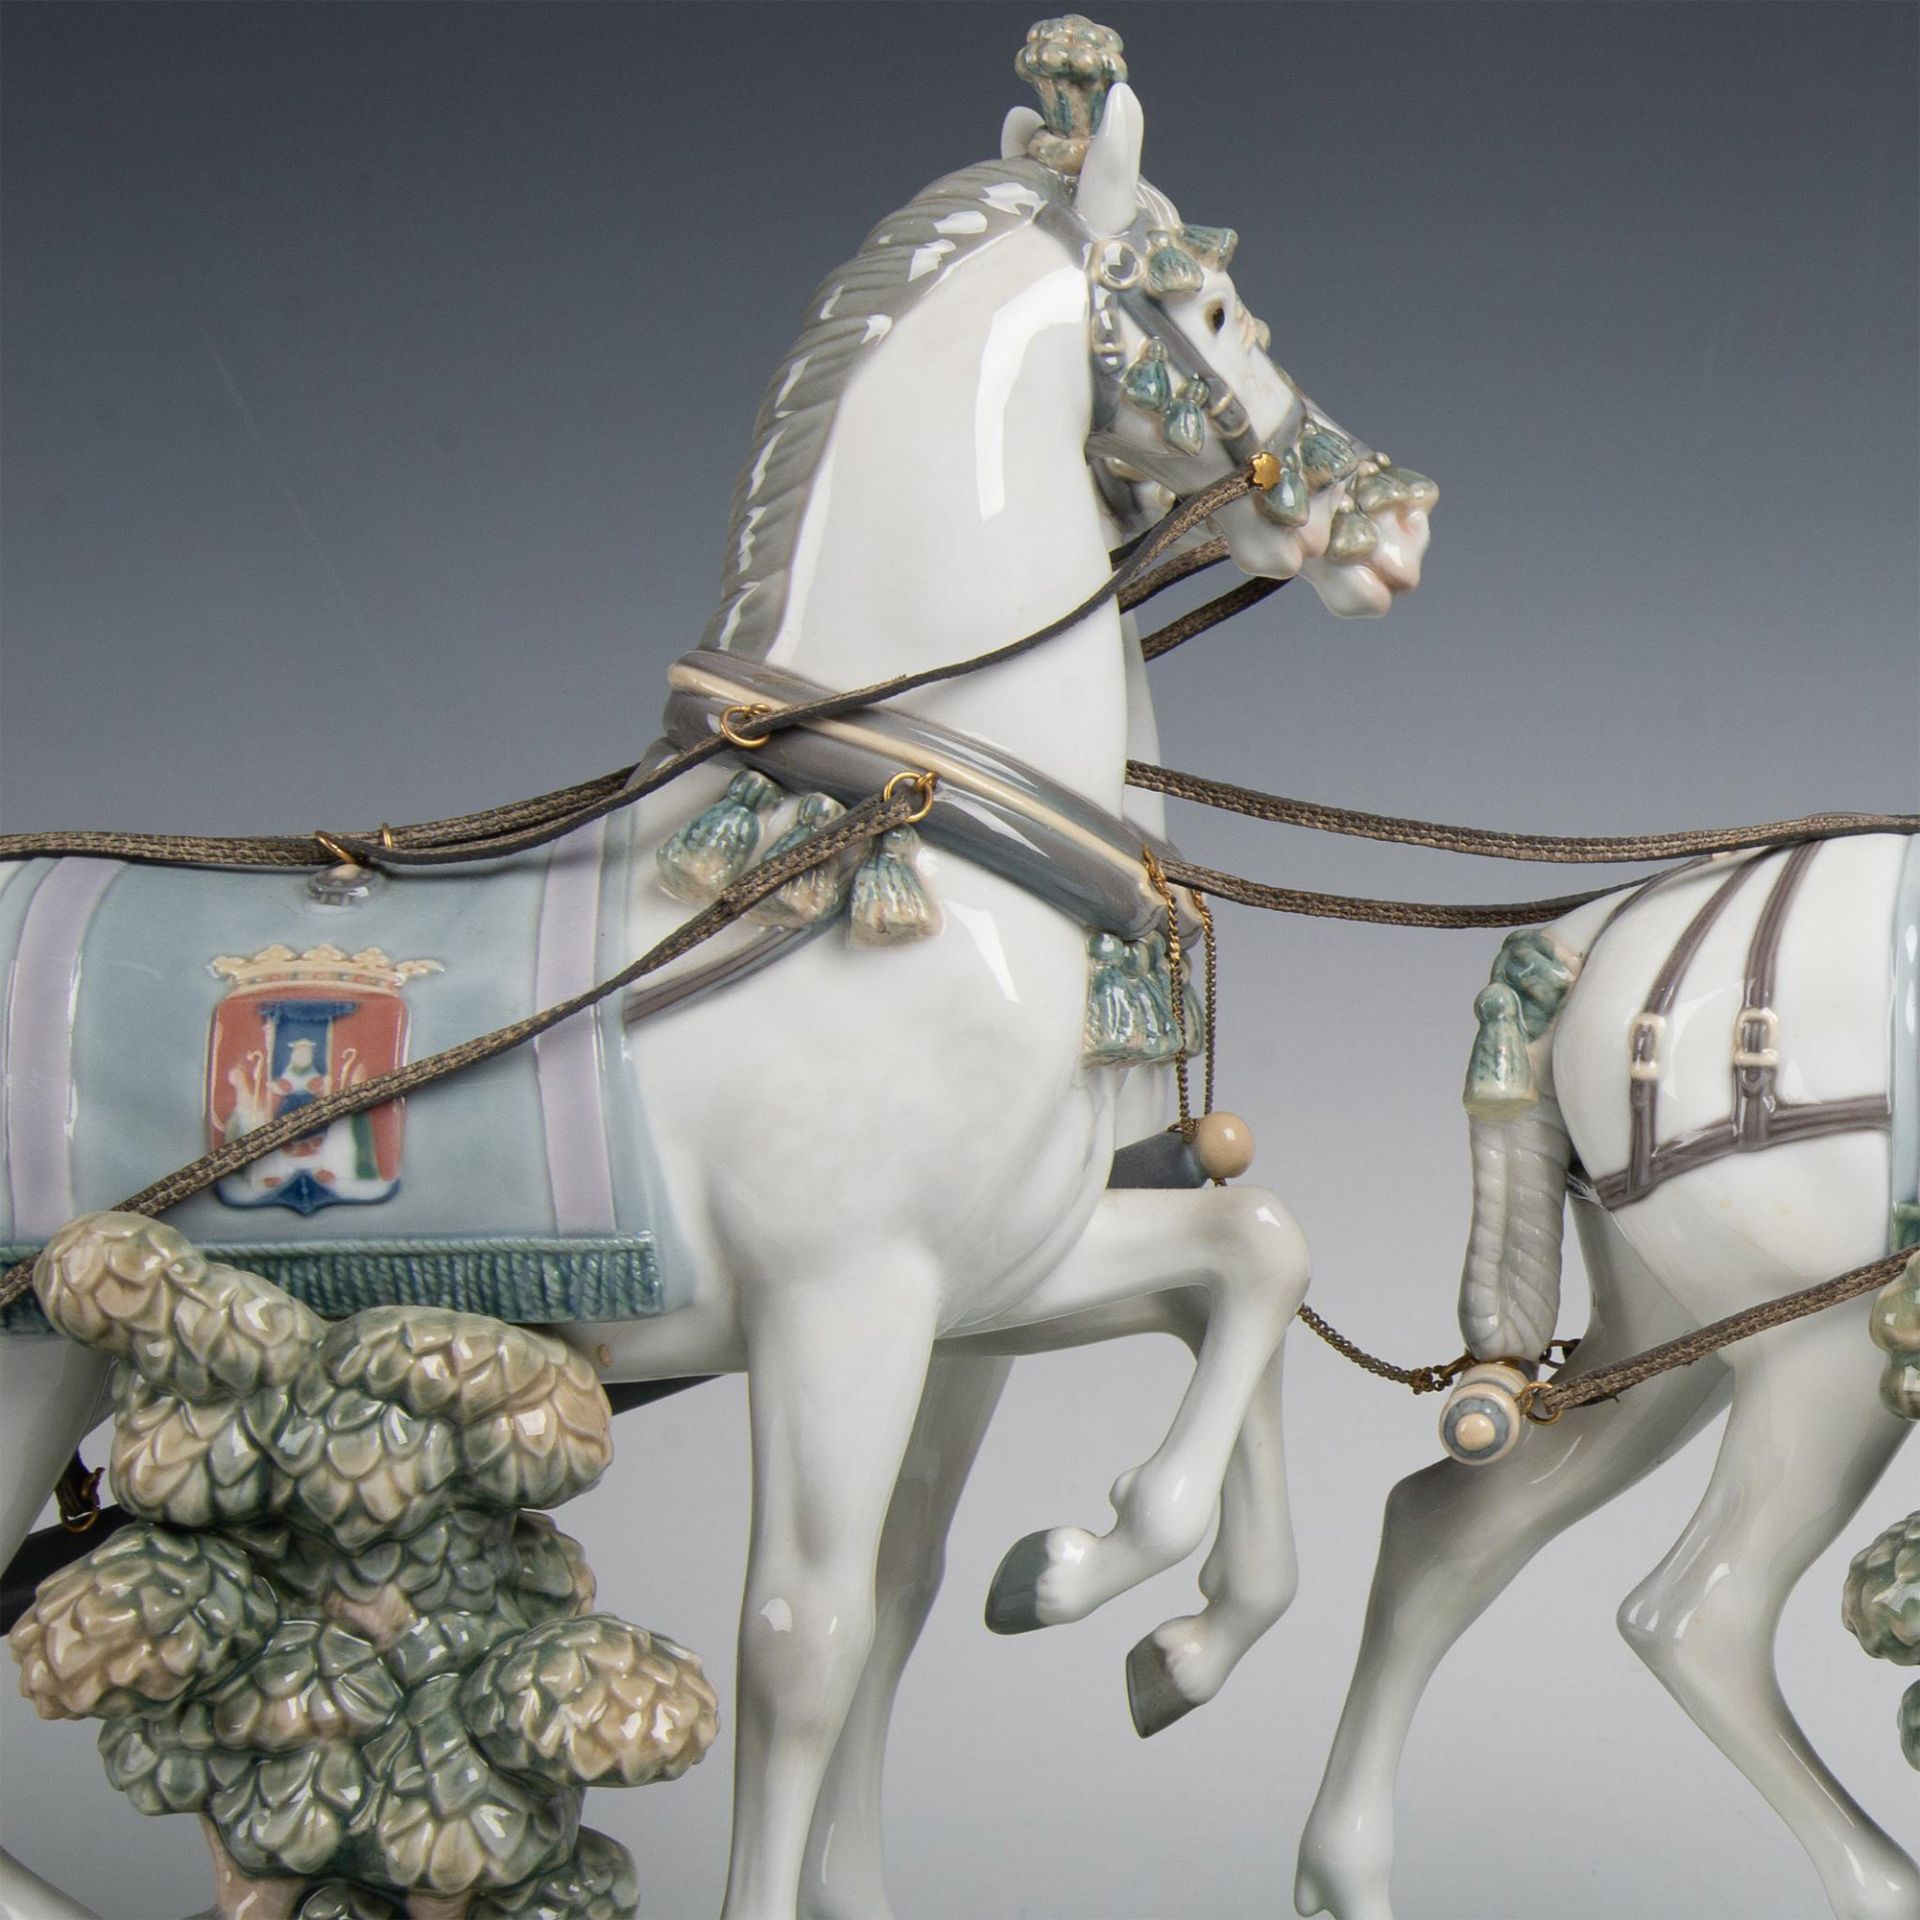 Lladro Porcelain Figurine, Outing in Seville 1001756 - Image 12 of 19